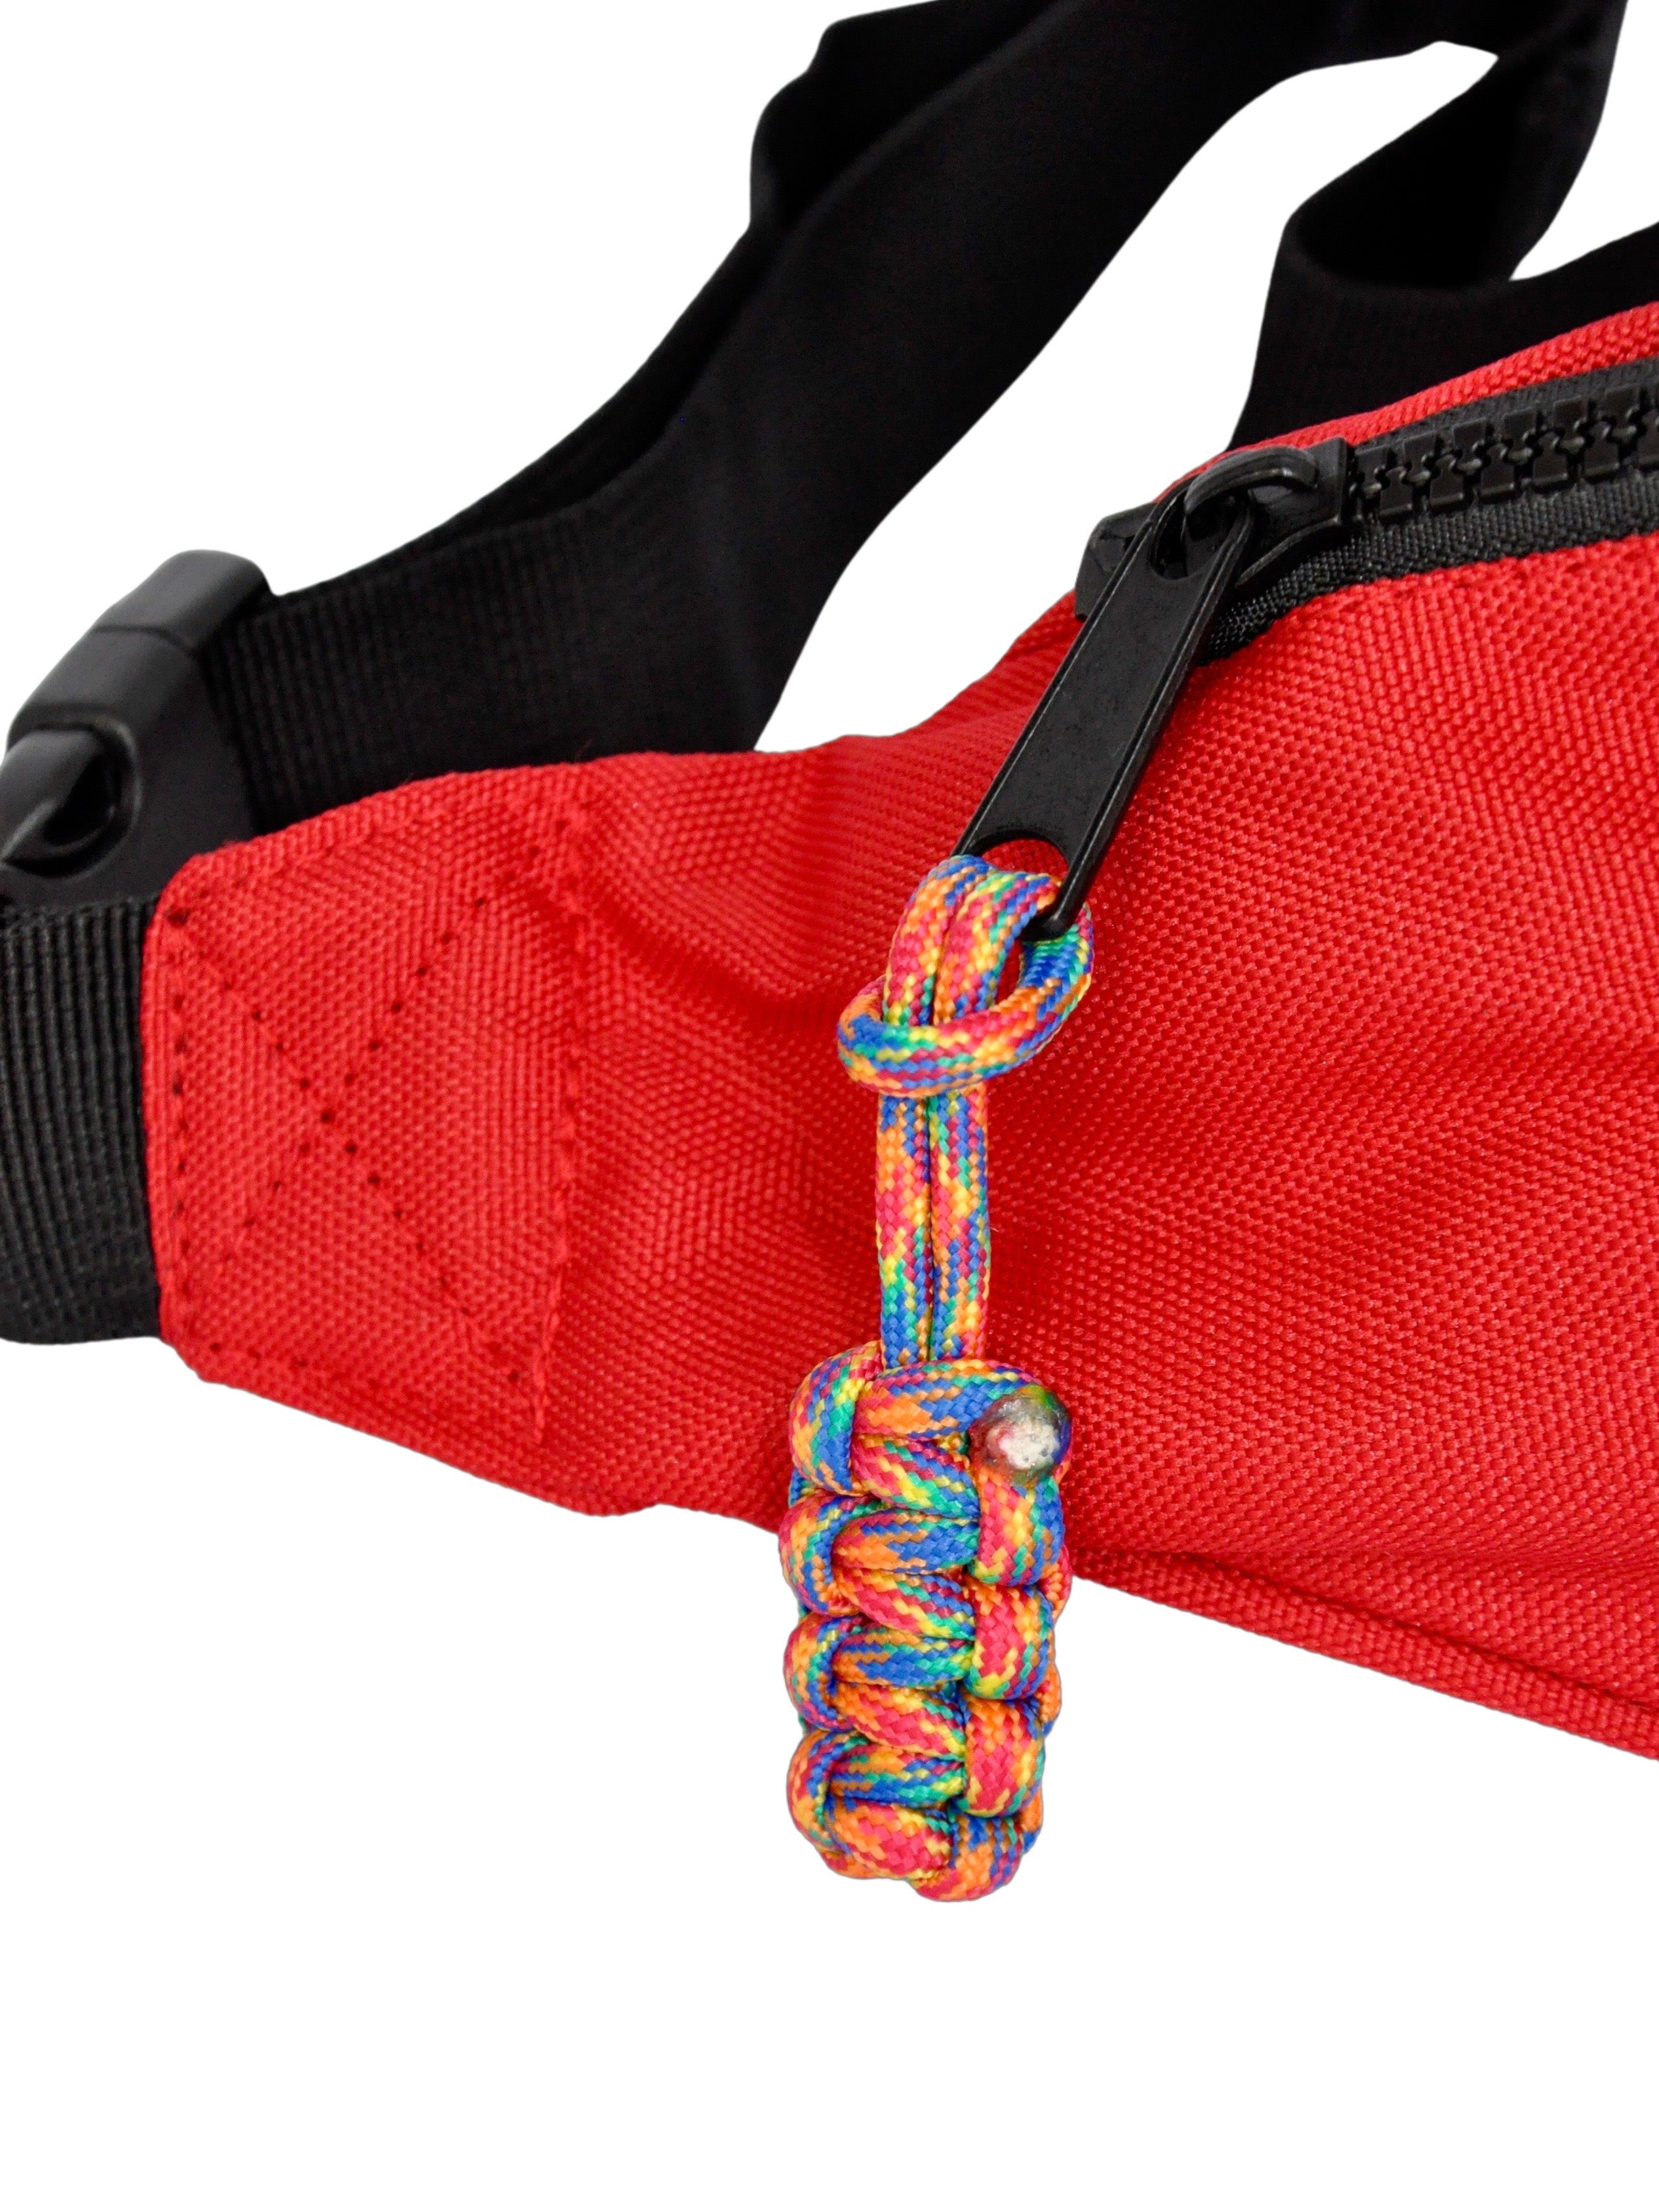 BY11 Recycled Cross Body Bag - Red/Primary